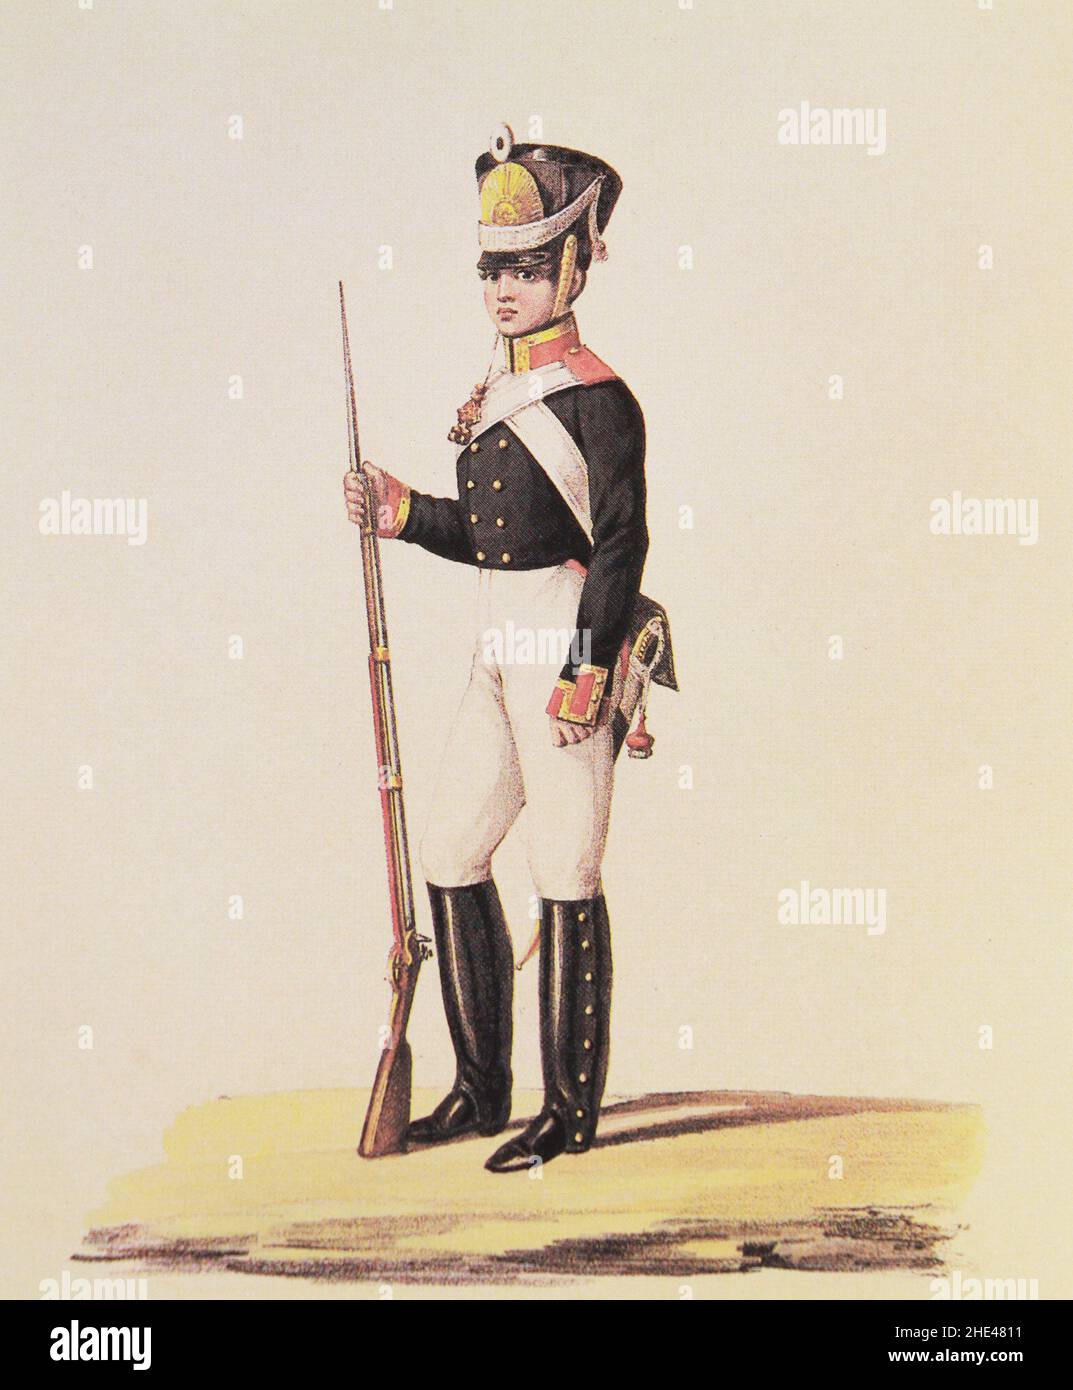 Cadet non-commissioned officer of the 1st Cadet Corps of the Russian Empire in 1817-1822. Stock Photo